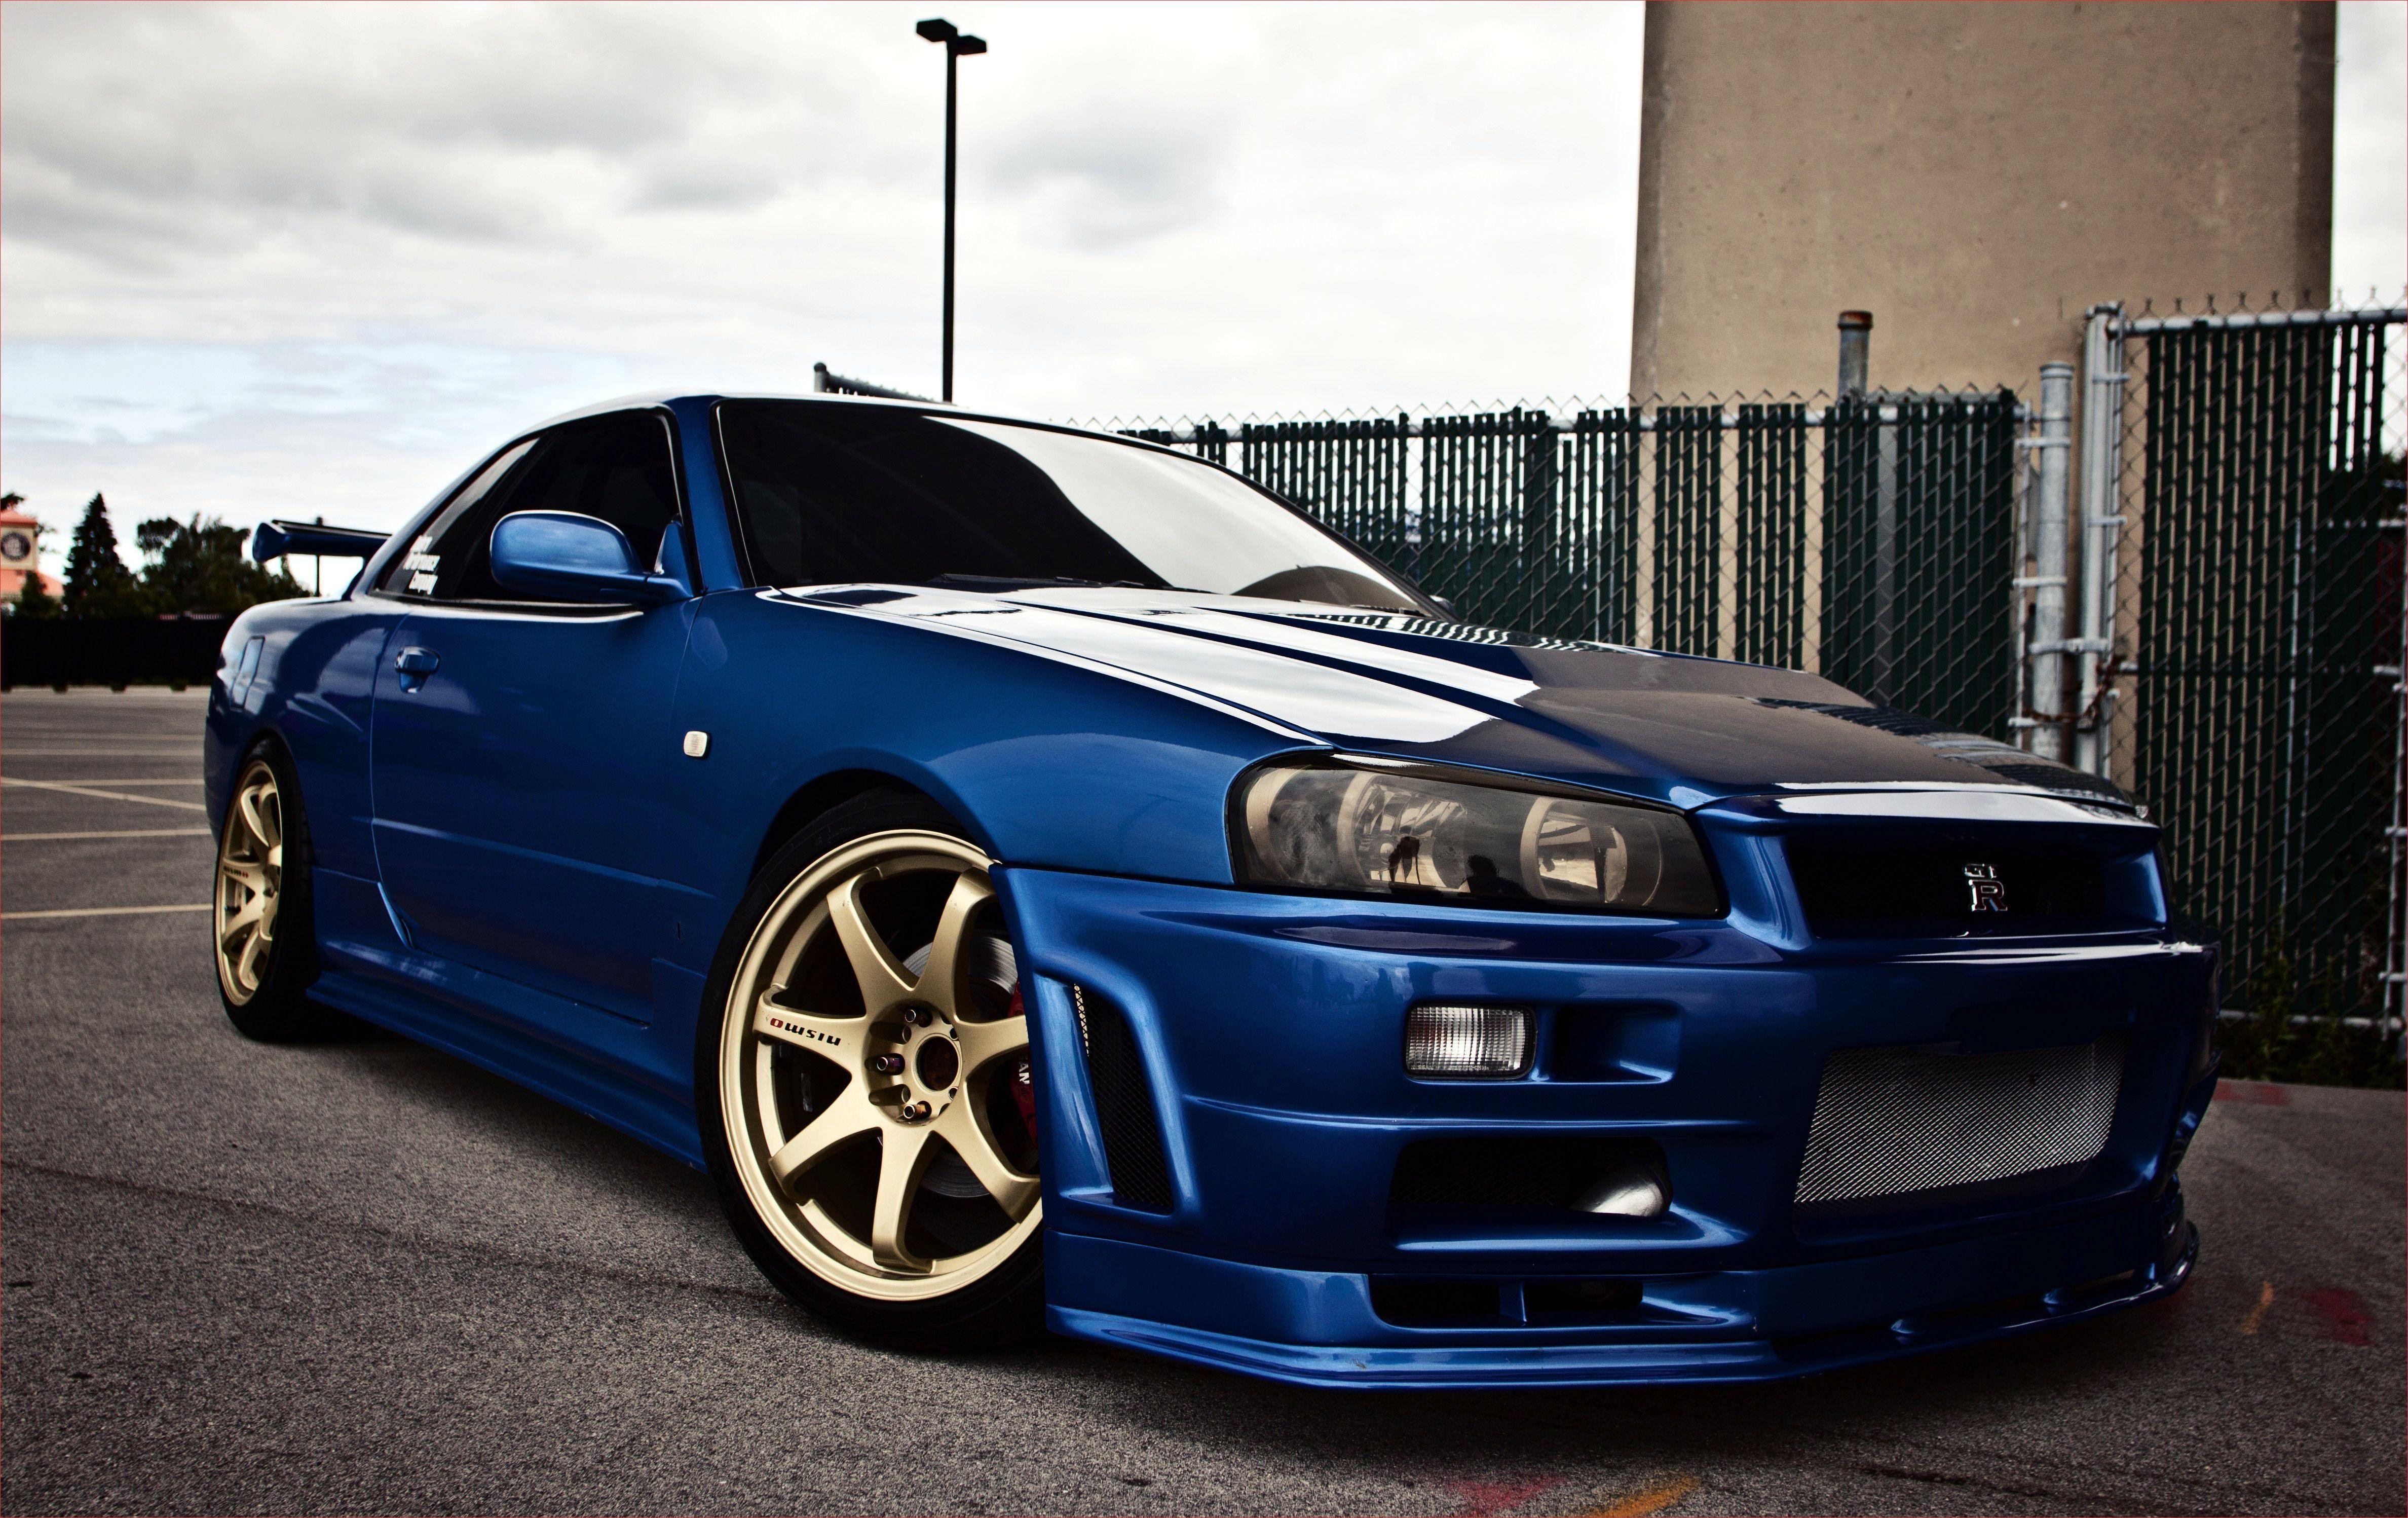 Blue Nissan Skyline R34 Wallpapers Top Free Blue Nissan Skyline R34 Backgrounds Wallpaperaccess